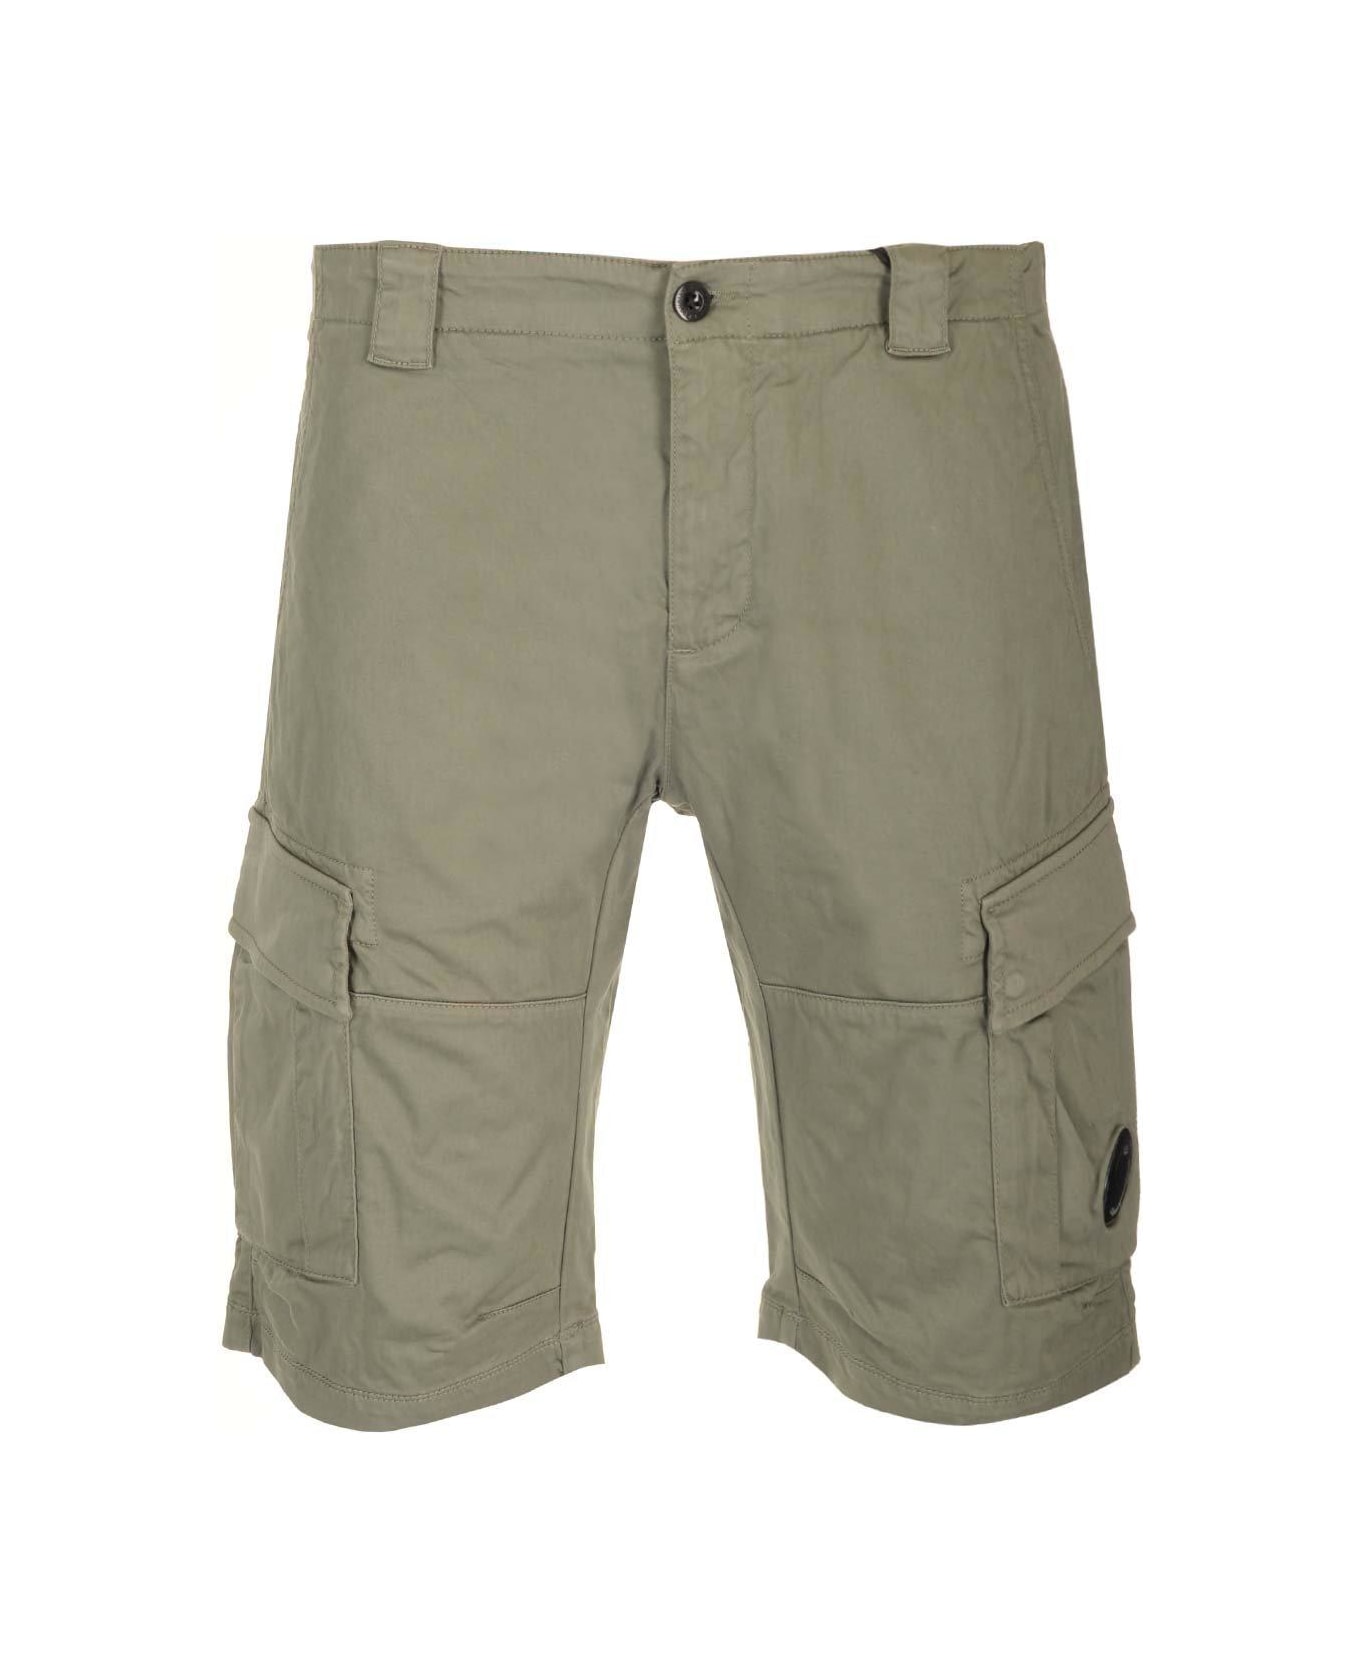 C.P. Company Lens-detailed Cargo Shorts - Agave green